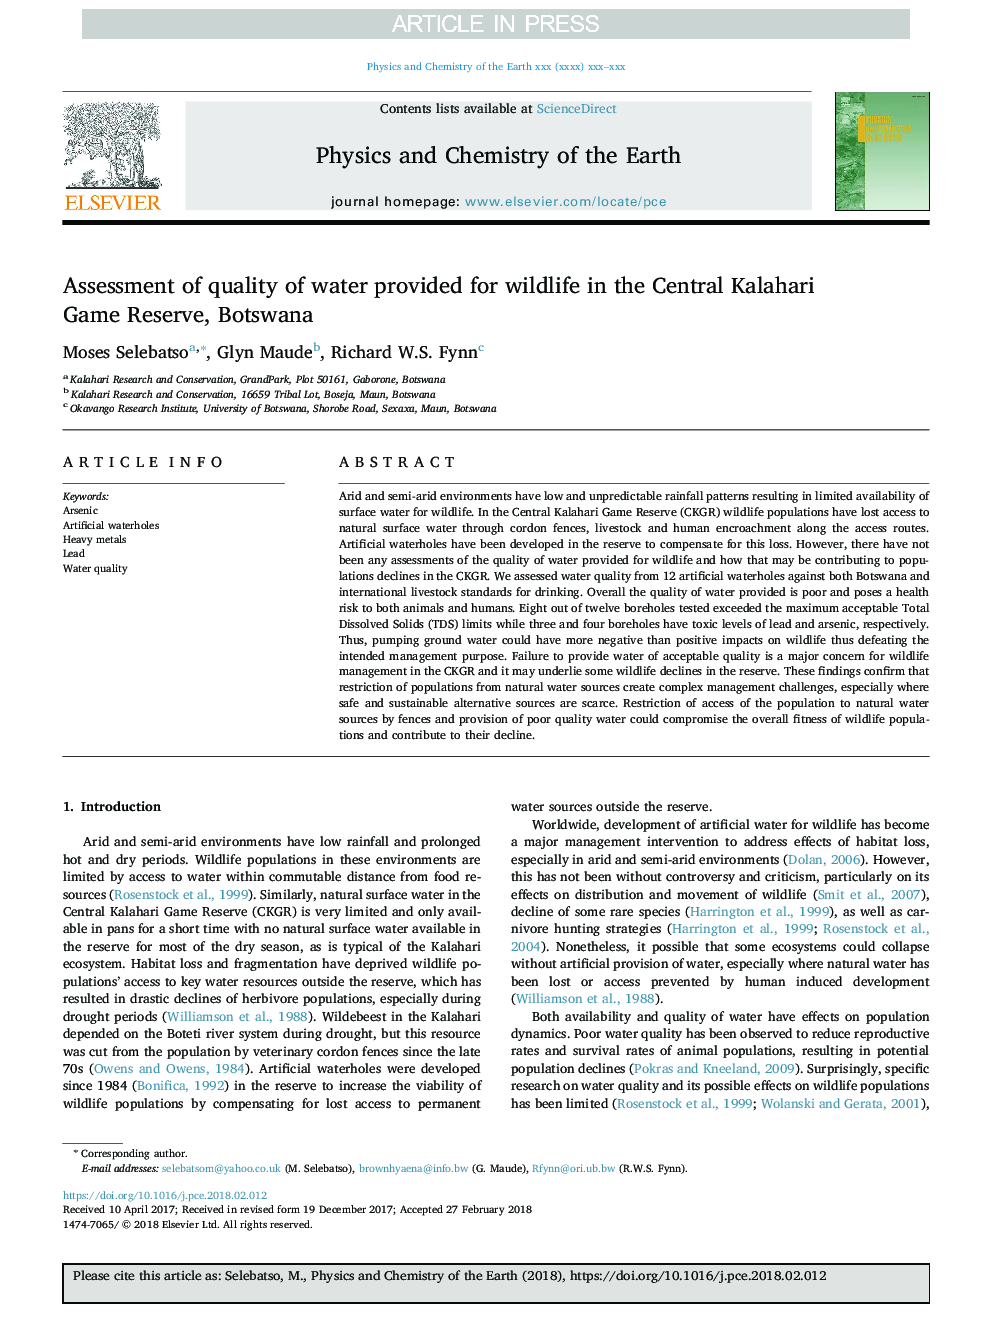 Assessment of quality of water provided for wildlife in the Central Kalahari Game Reserve, Botswana